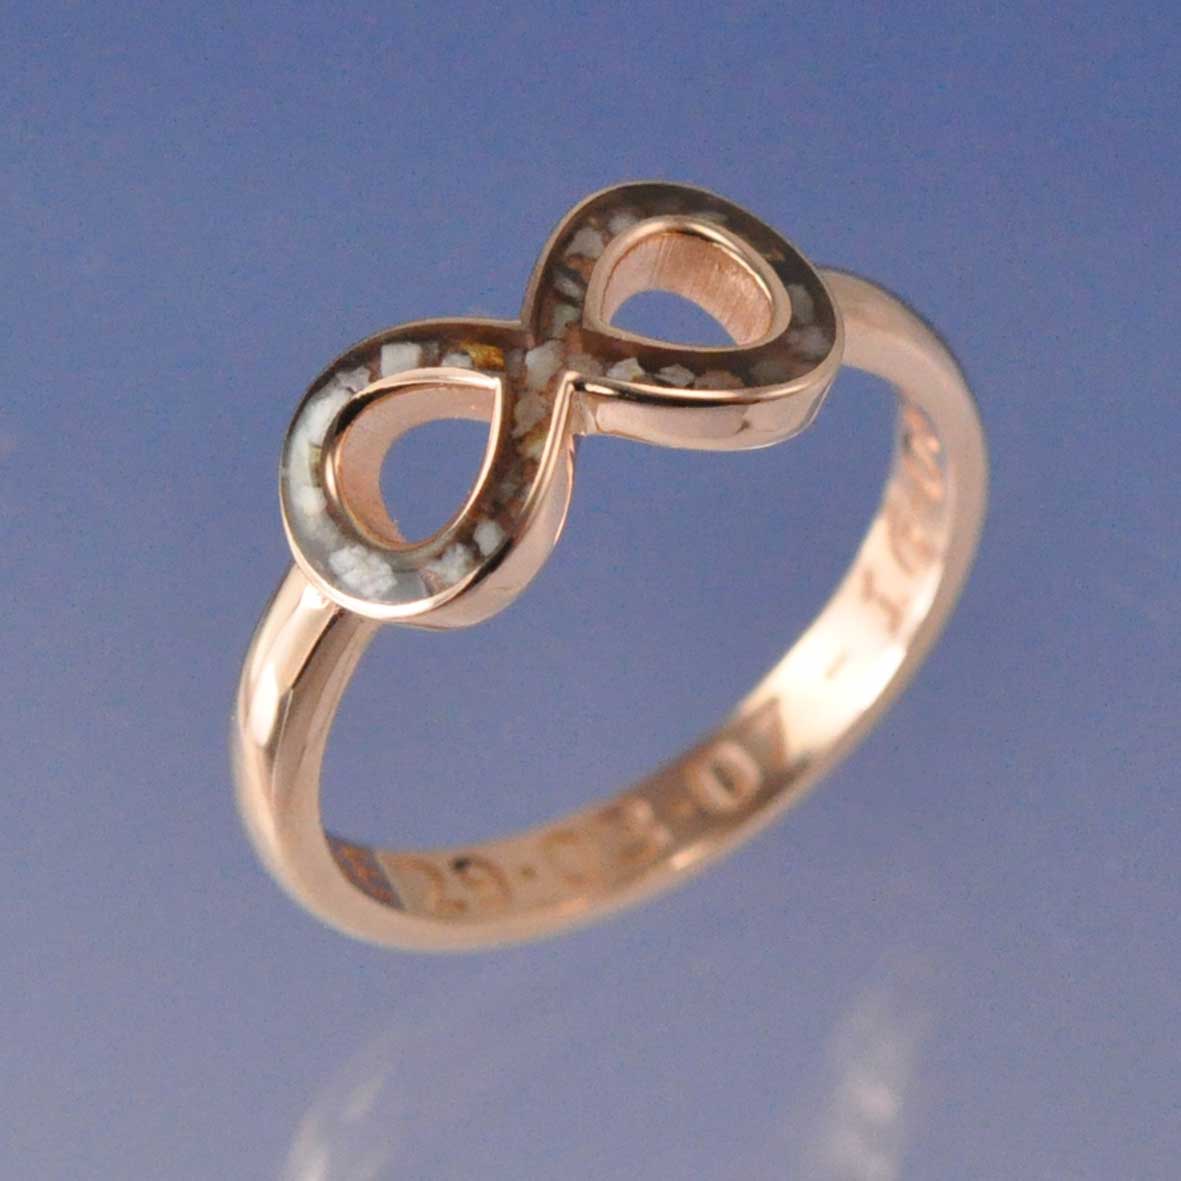 Cremation Ash Resin Infinity Ring Ring by Chris Parry Jewellery